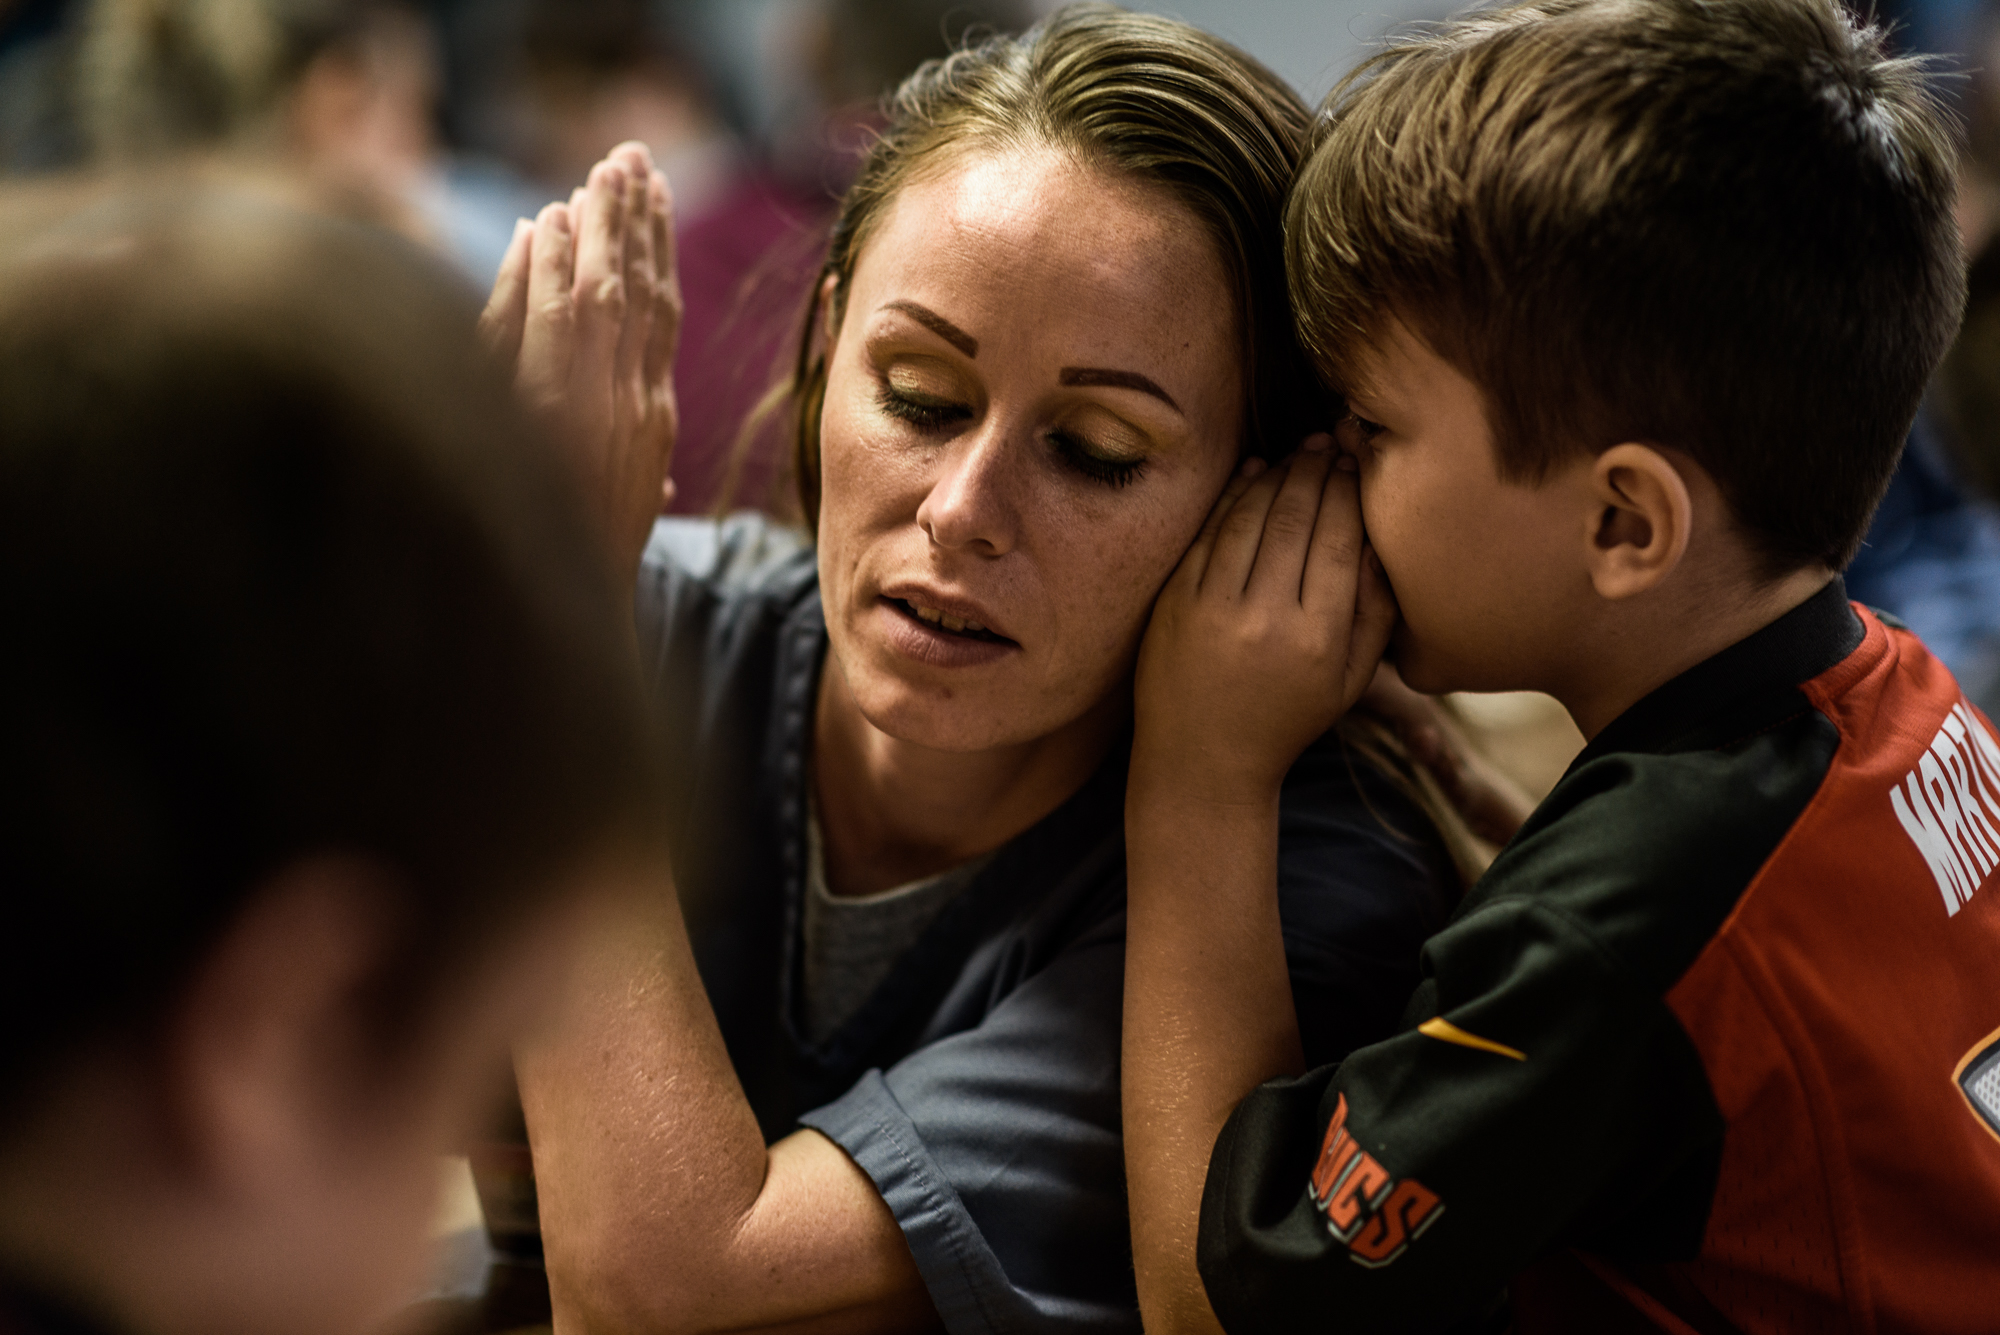  Caleb, age 7, whispers in his mom, Mary’s, ear during a visit at the Hernando Correctional Institution in Ocala, Florida. 